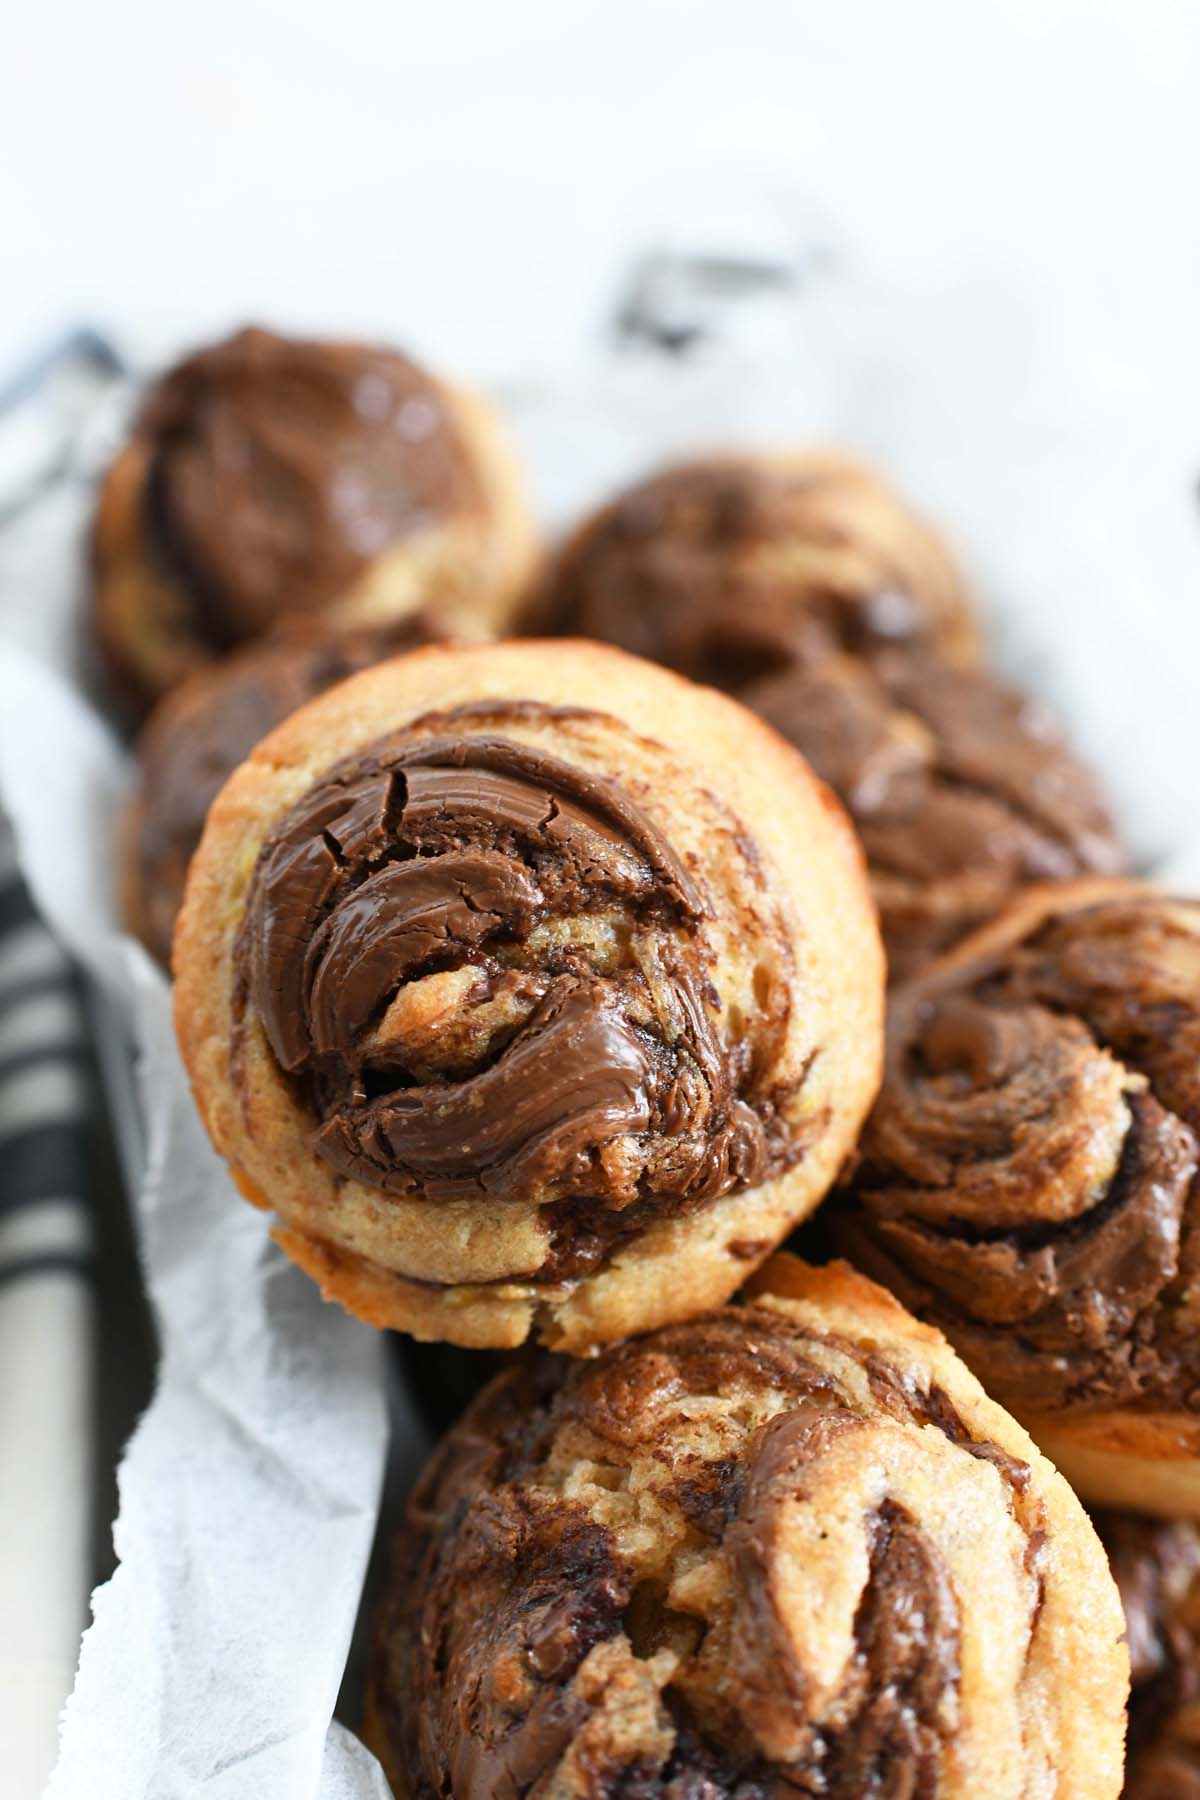 Nutella Swirled Banana Muffins up close. There is a pretty brown Nutella swirl on these banana muffins.